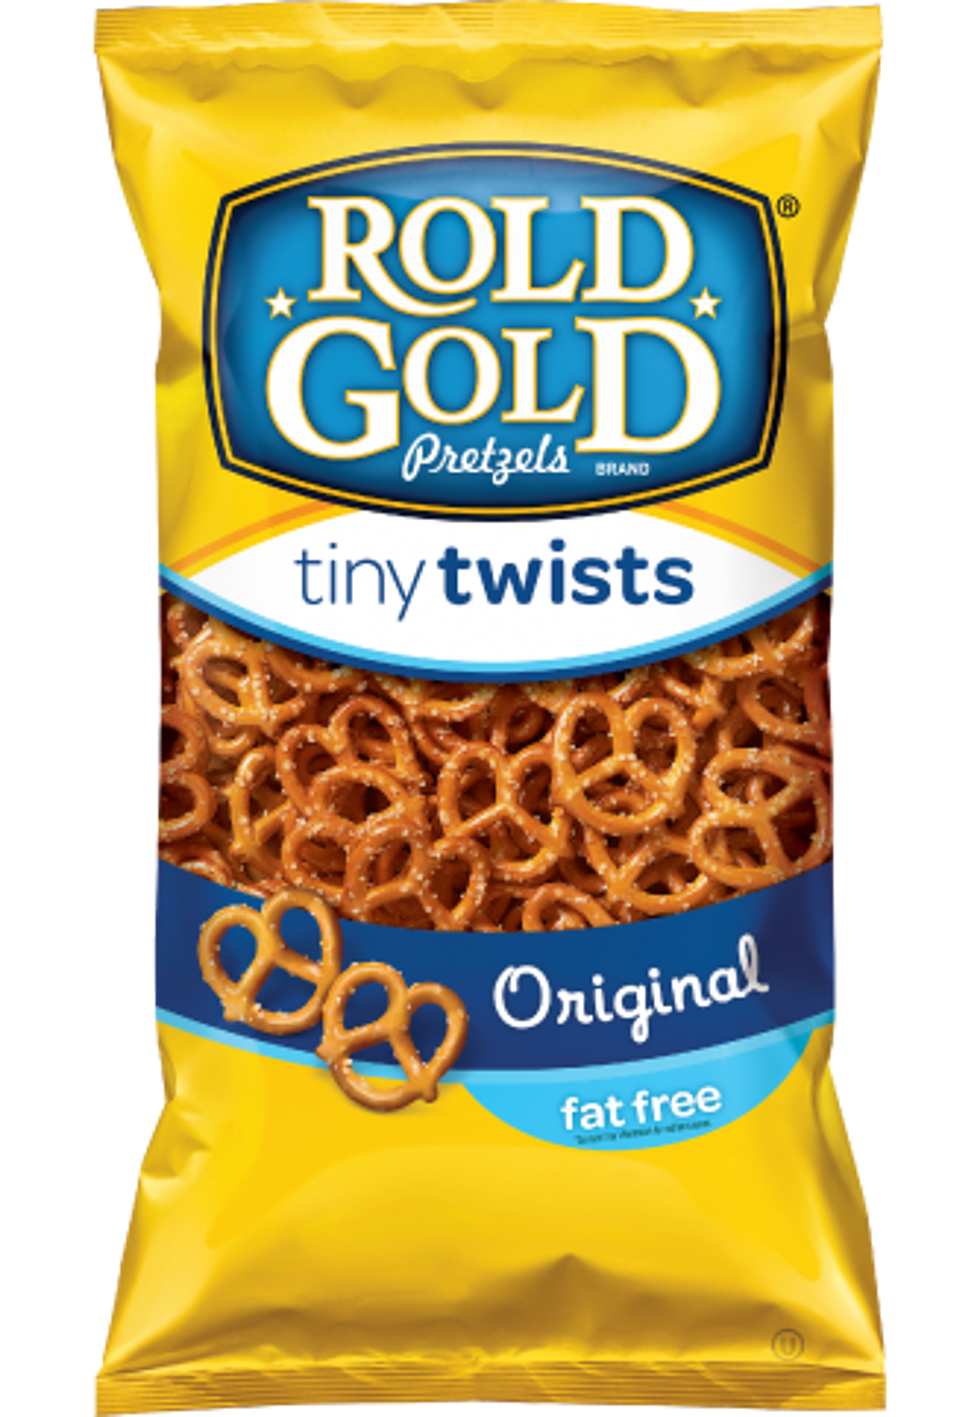 Frito Lay Issues Recall of Some Rold Gold Products